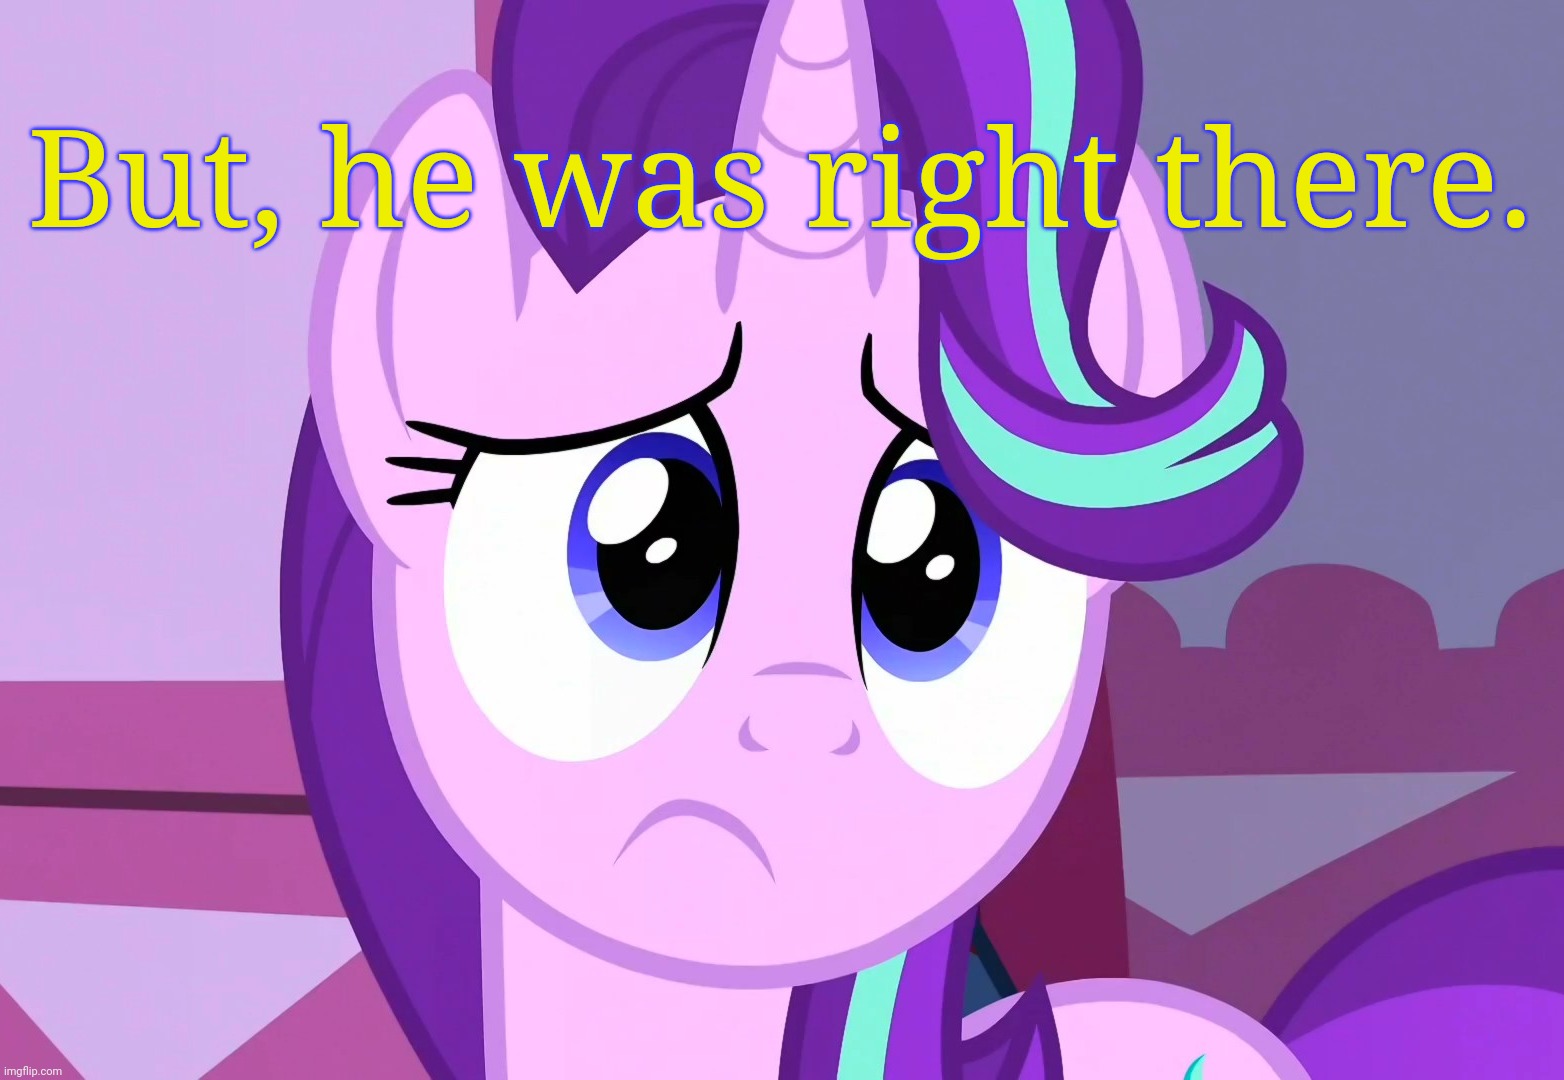 Sadlight Glimmer (MLP) | But, he was right there. | image tagged in sadlight glimmer mlp | made w/ Imgflip meme maker